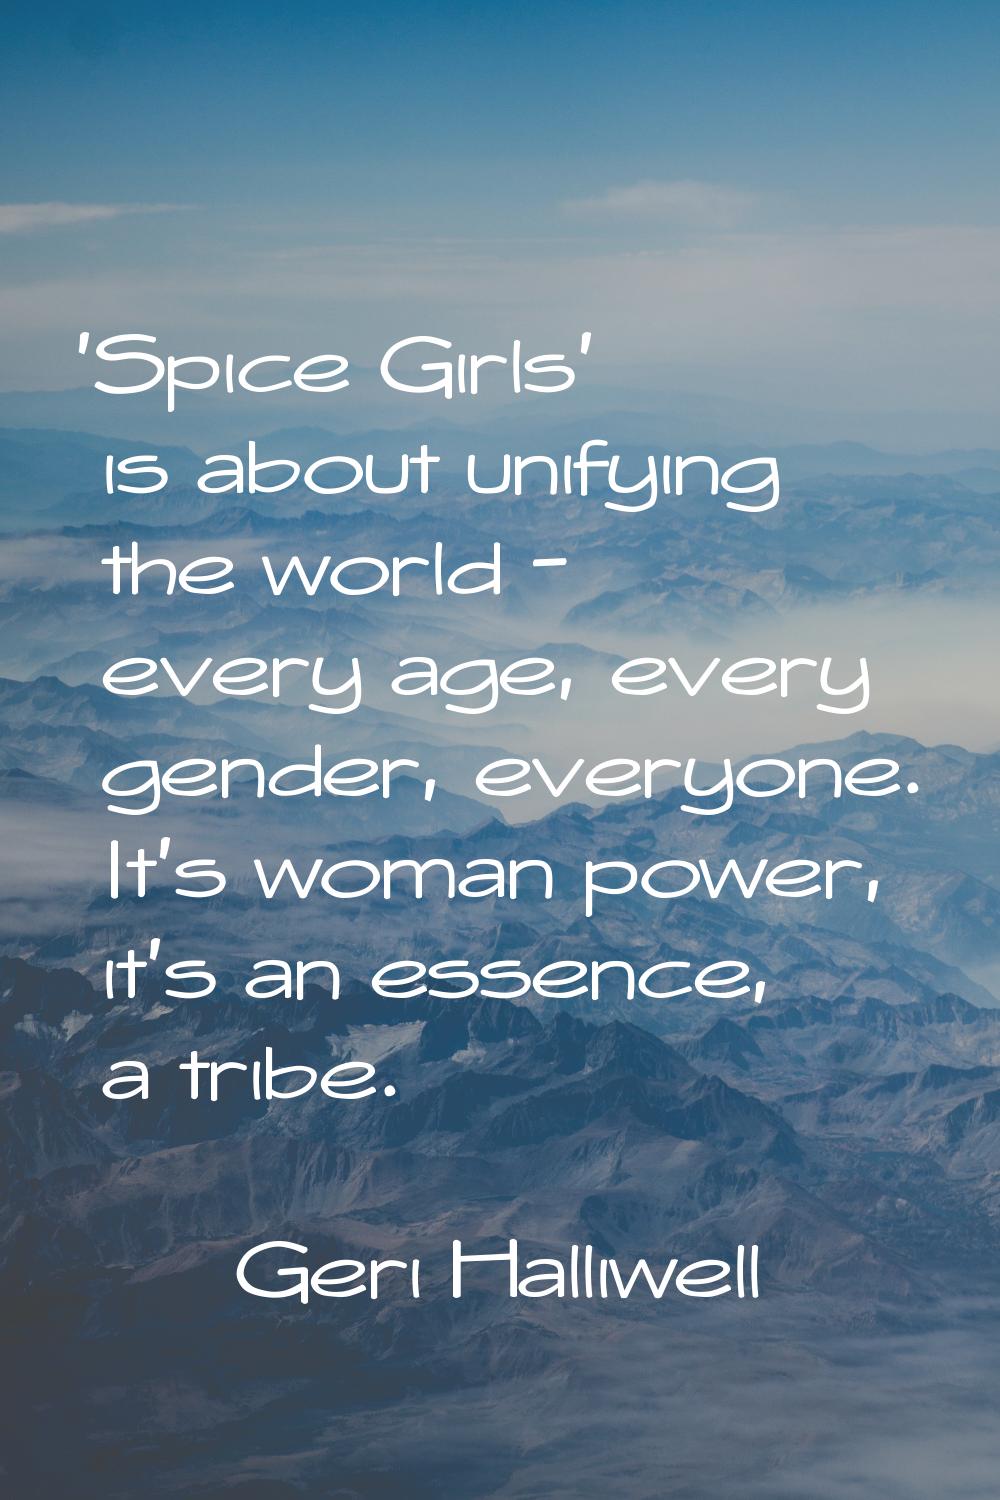 'Spice Girls' is about unifying the world - every age, every gender, everyone. It's woman power, it